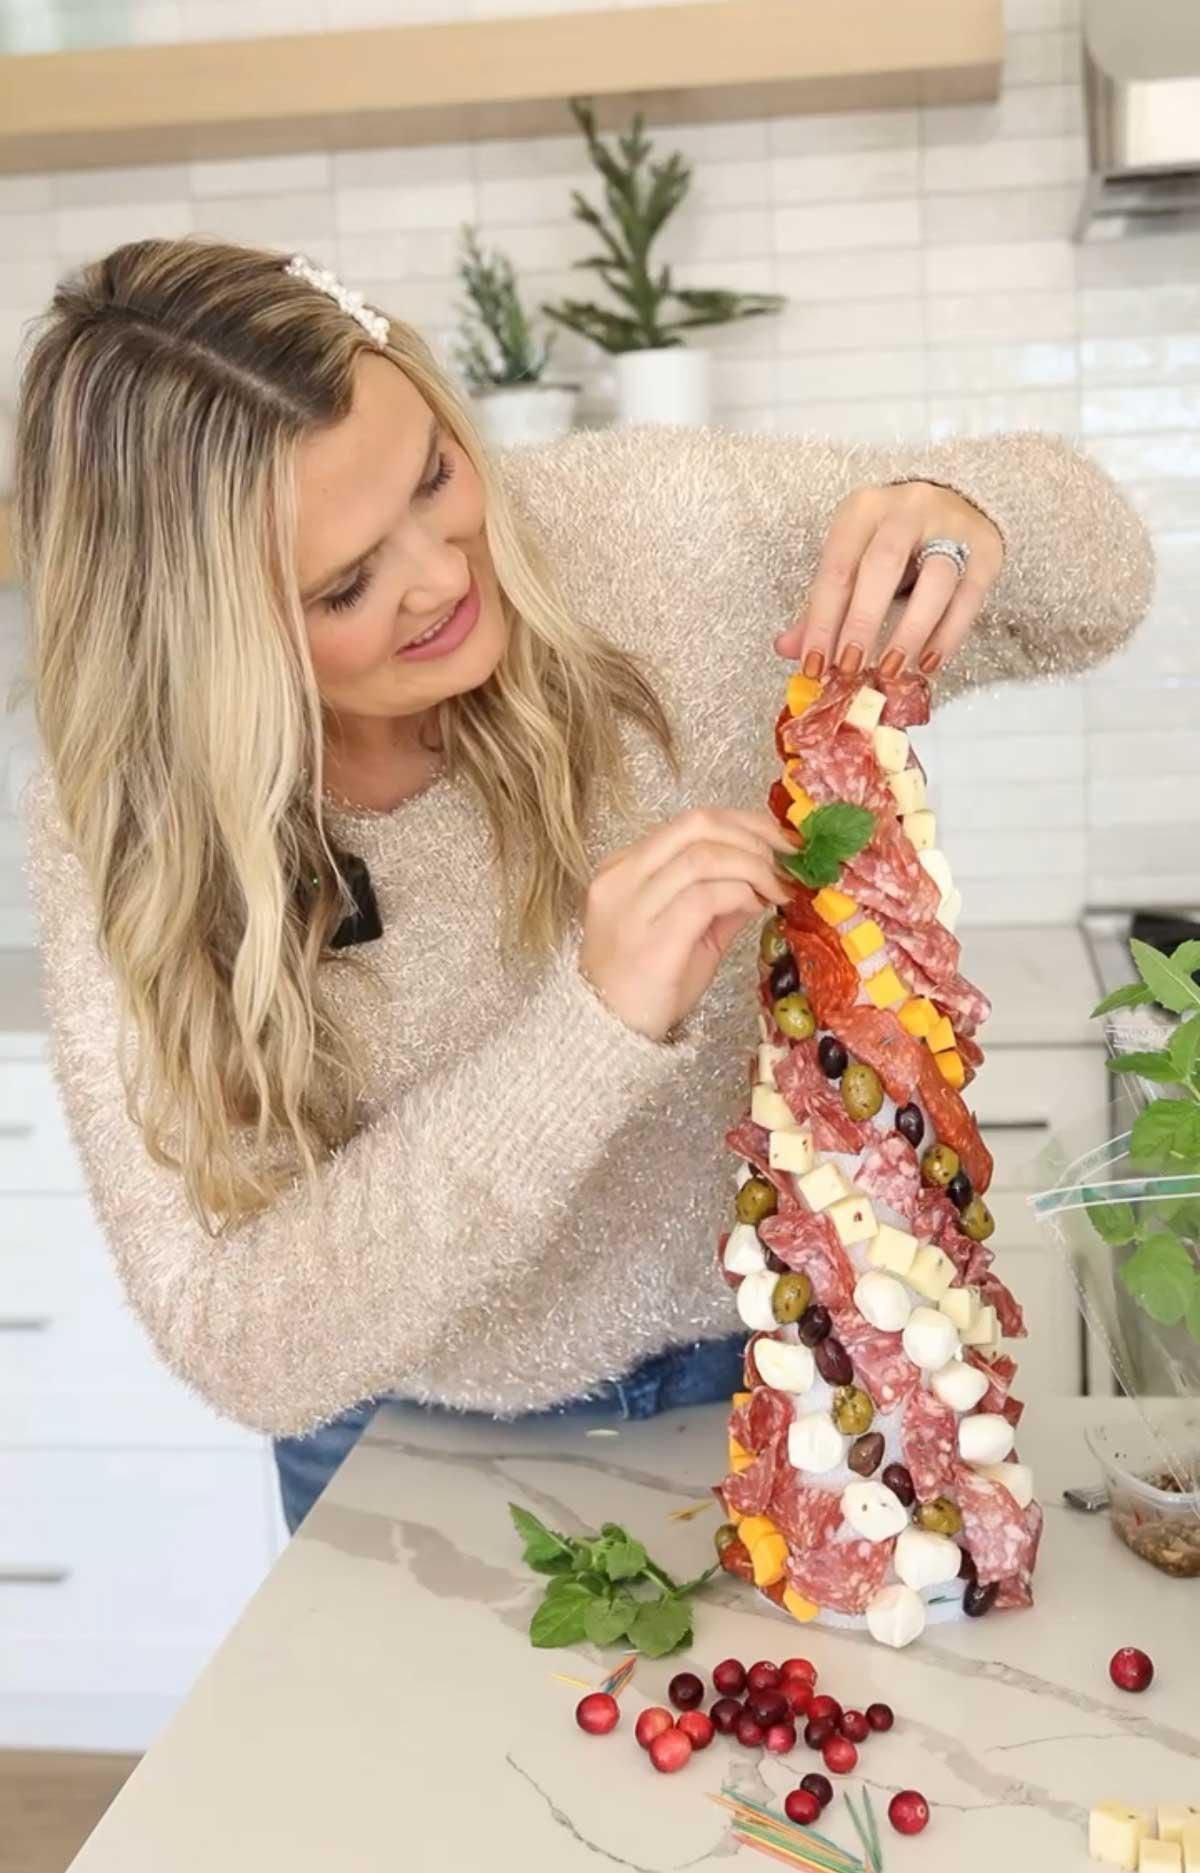 How to Make a Charcuterie Tree step by step